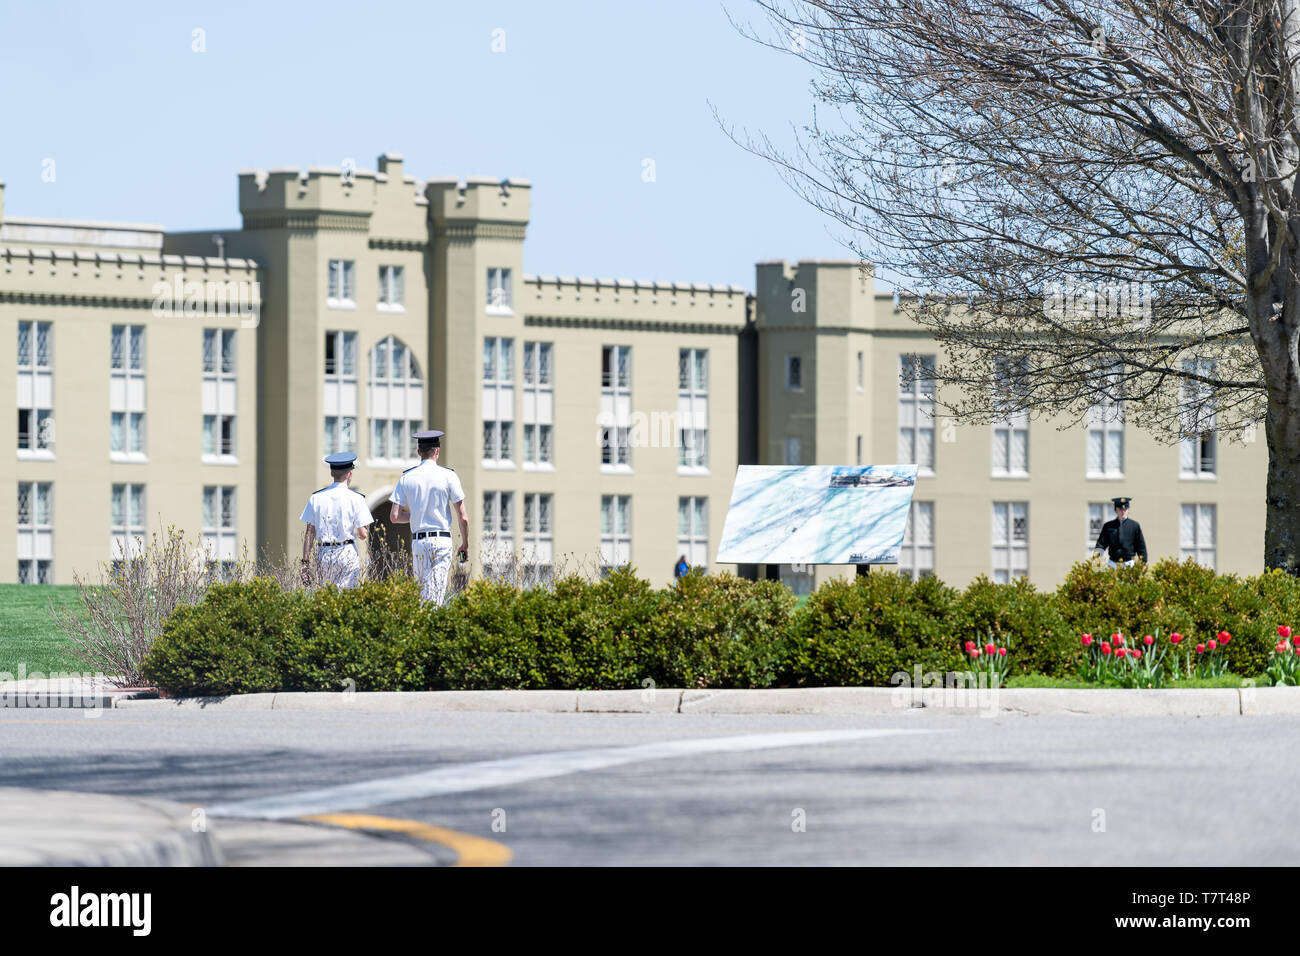 Lexington, USA - April 18, 2018: Men, male cadets students in white uniforms walking at Virginia Military Institute main campus grounds in front of Cl Stock Photo